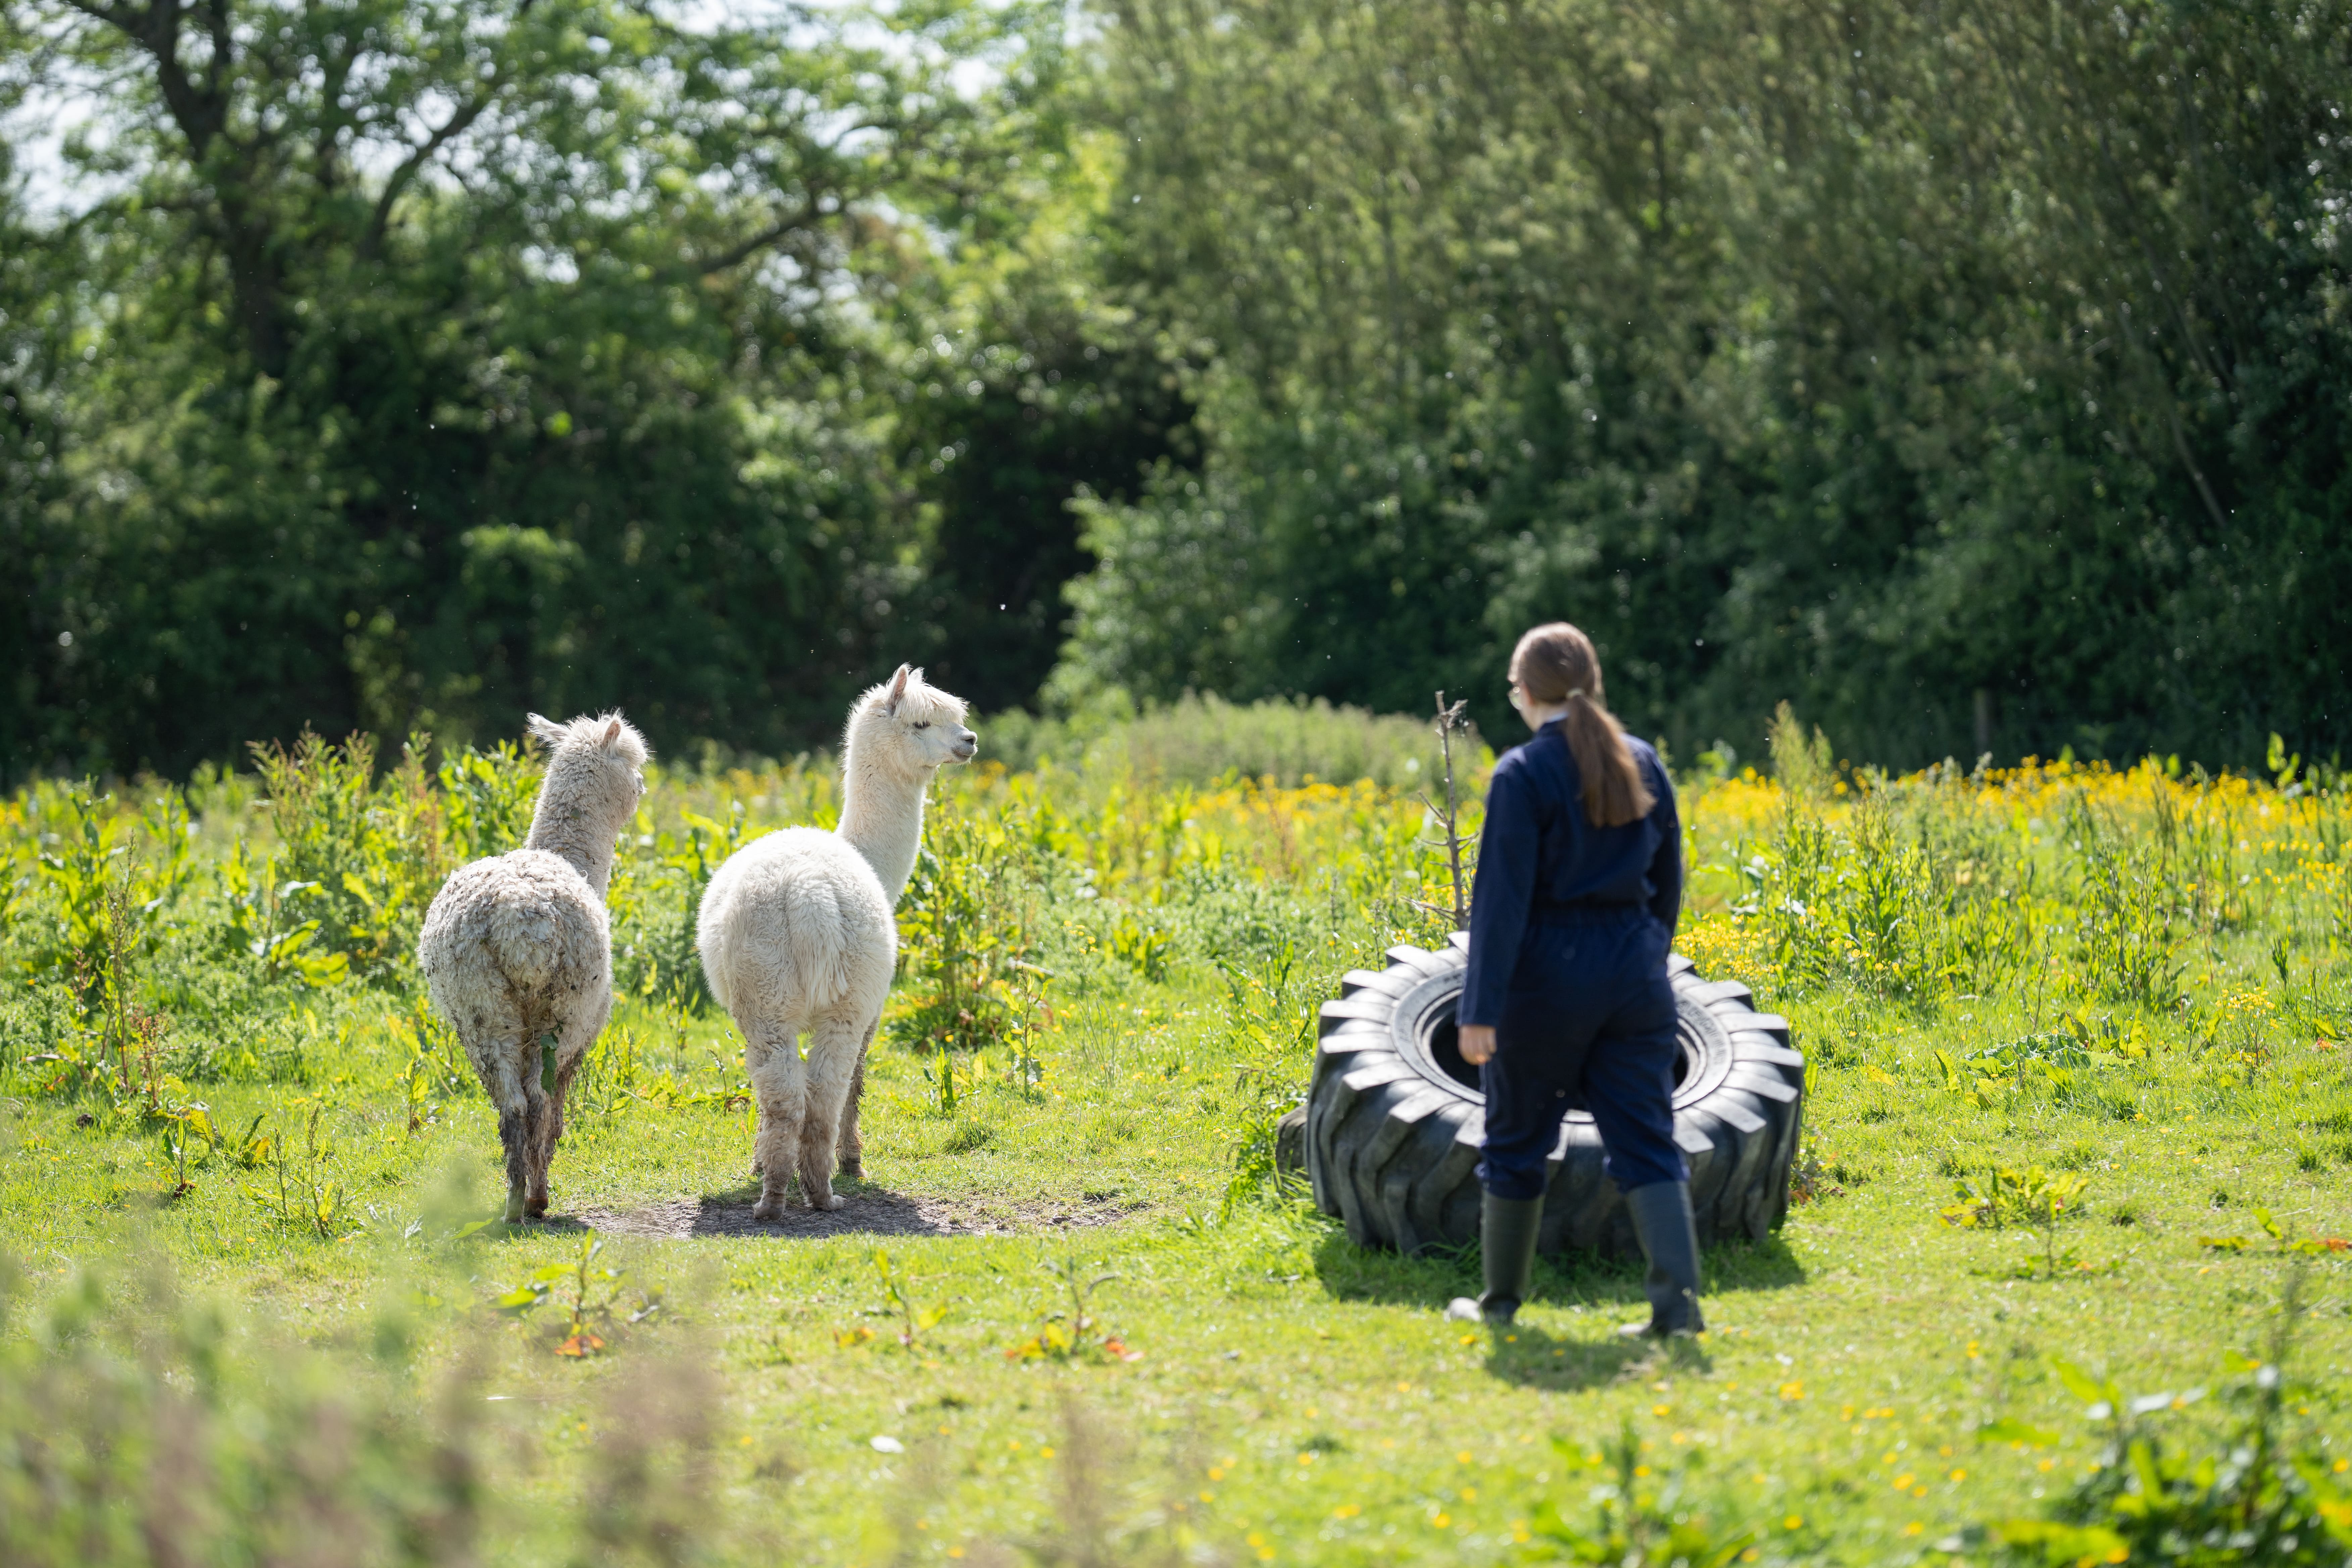 studnets in a field with alpacas